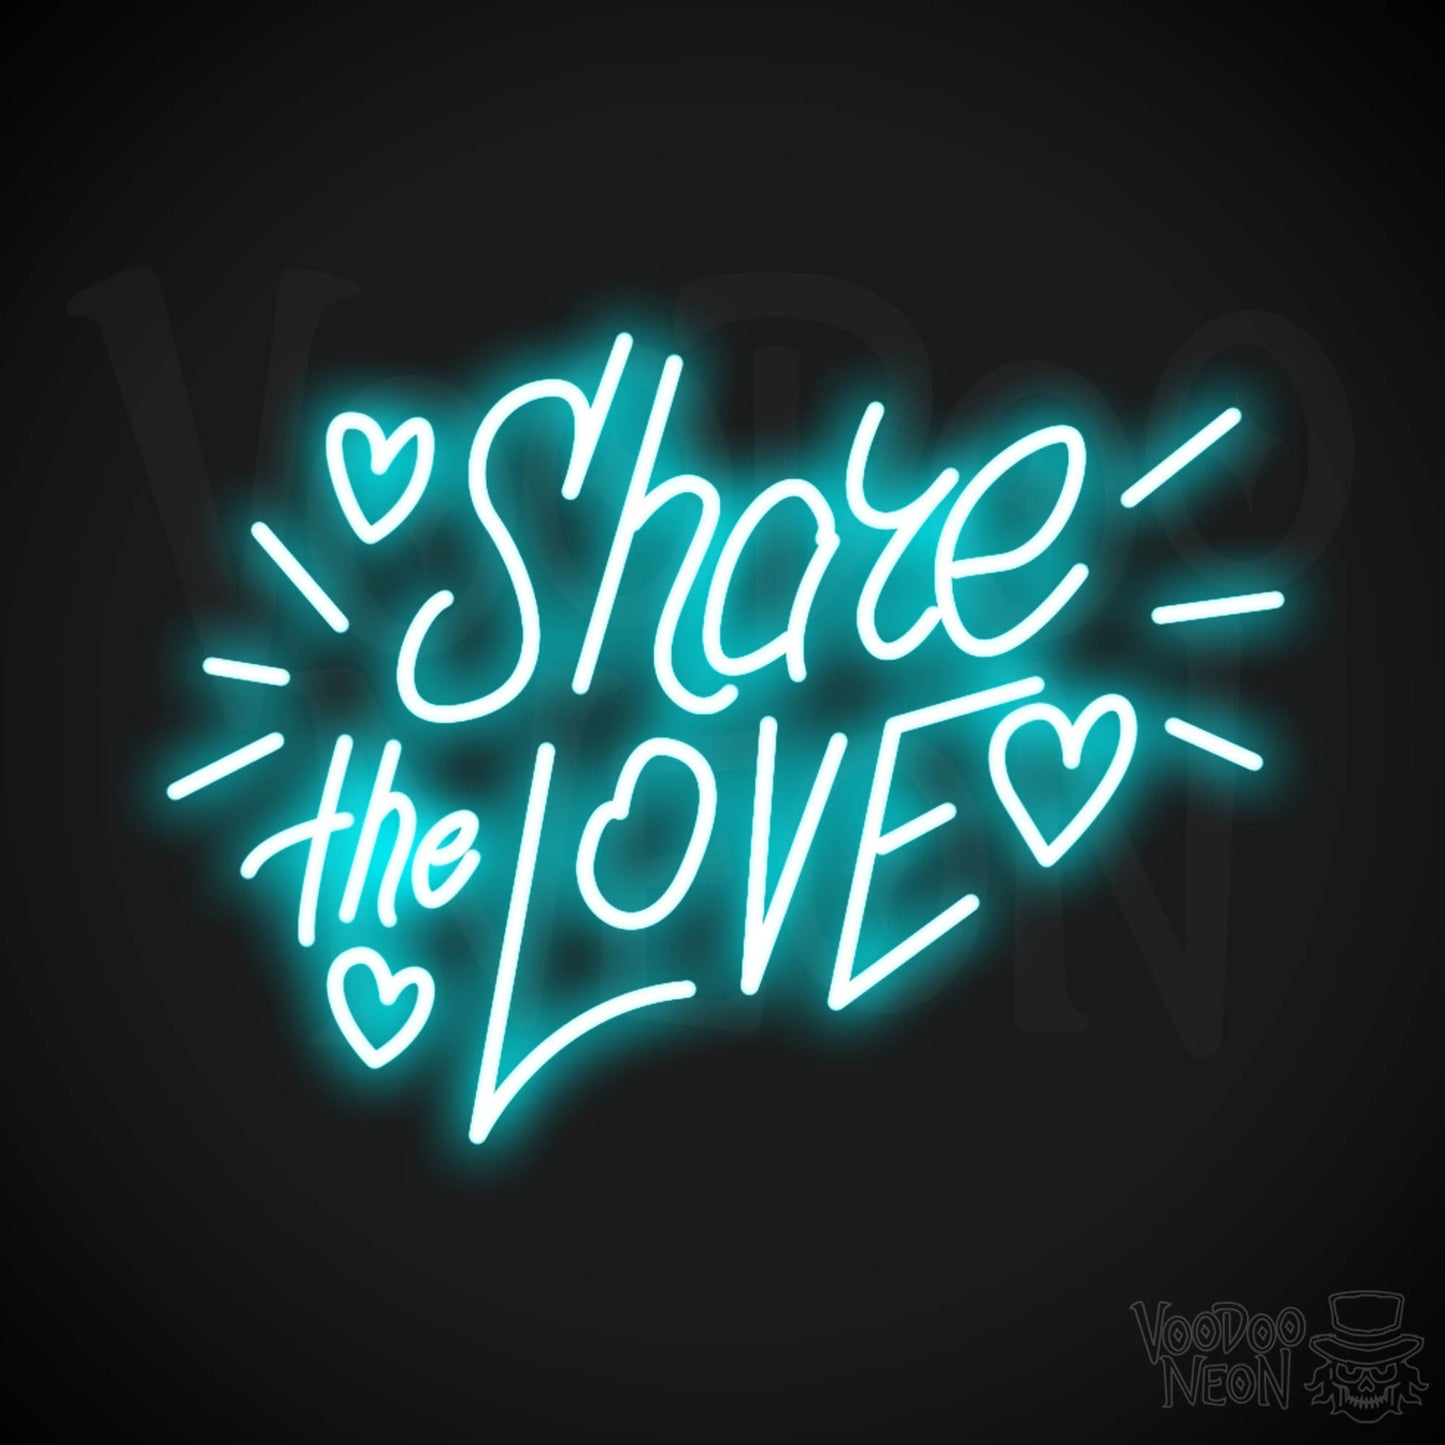 Share The Love Neon Sign - Neon Share The Love Sign - Color Ice Blue